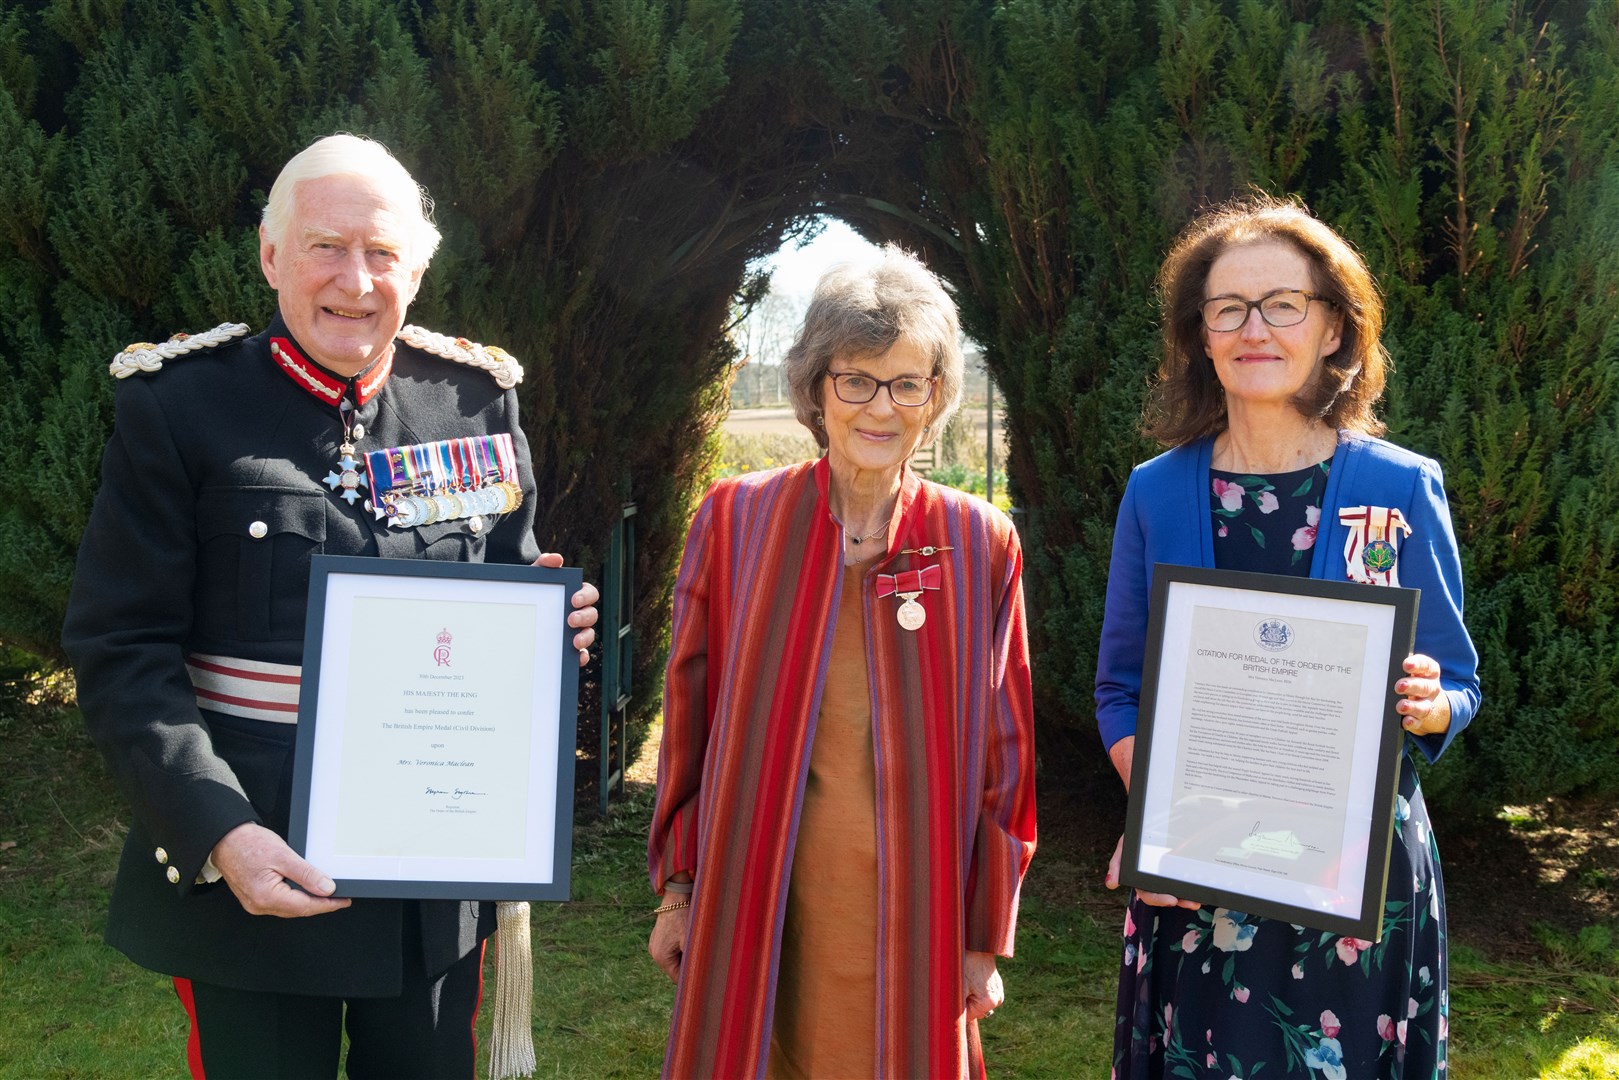 Veronica MacLean BEM alongside Lord-Lieutenant of Moray, Seymour Monro and Moray's Vice Lord-Lieutenant Nancy Robson who presented her medal. Picture: Beth Taylor